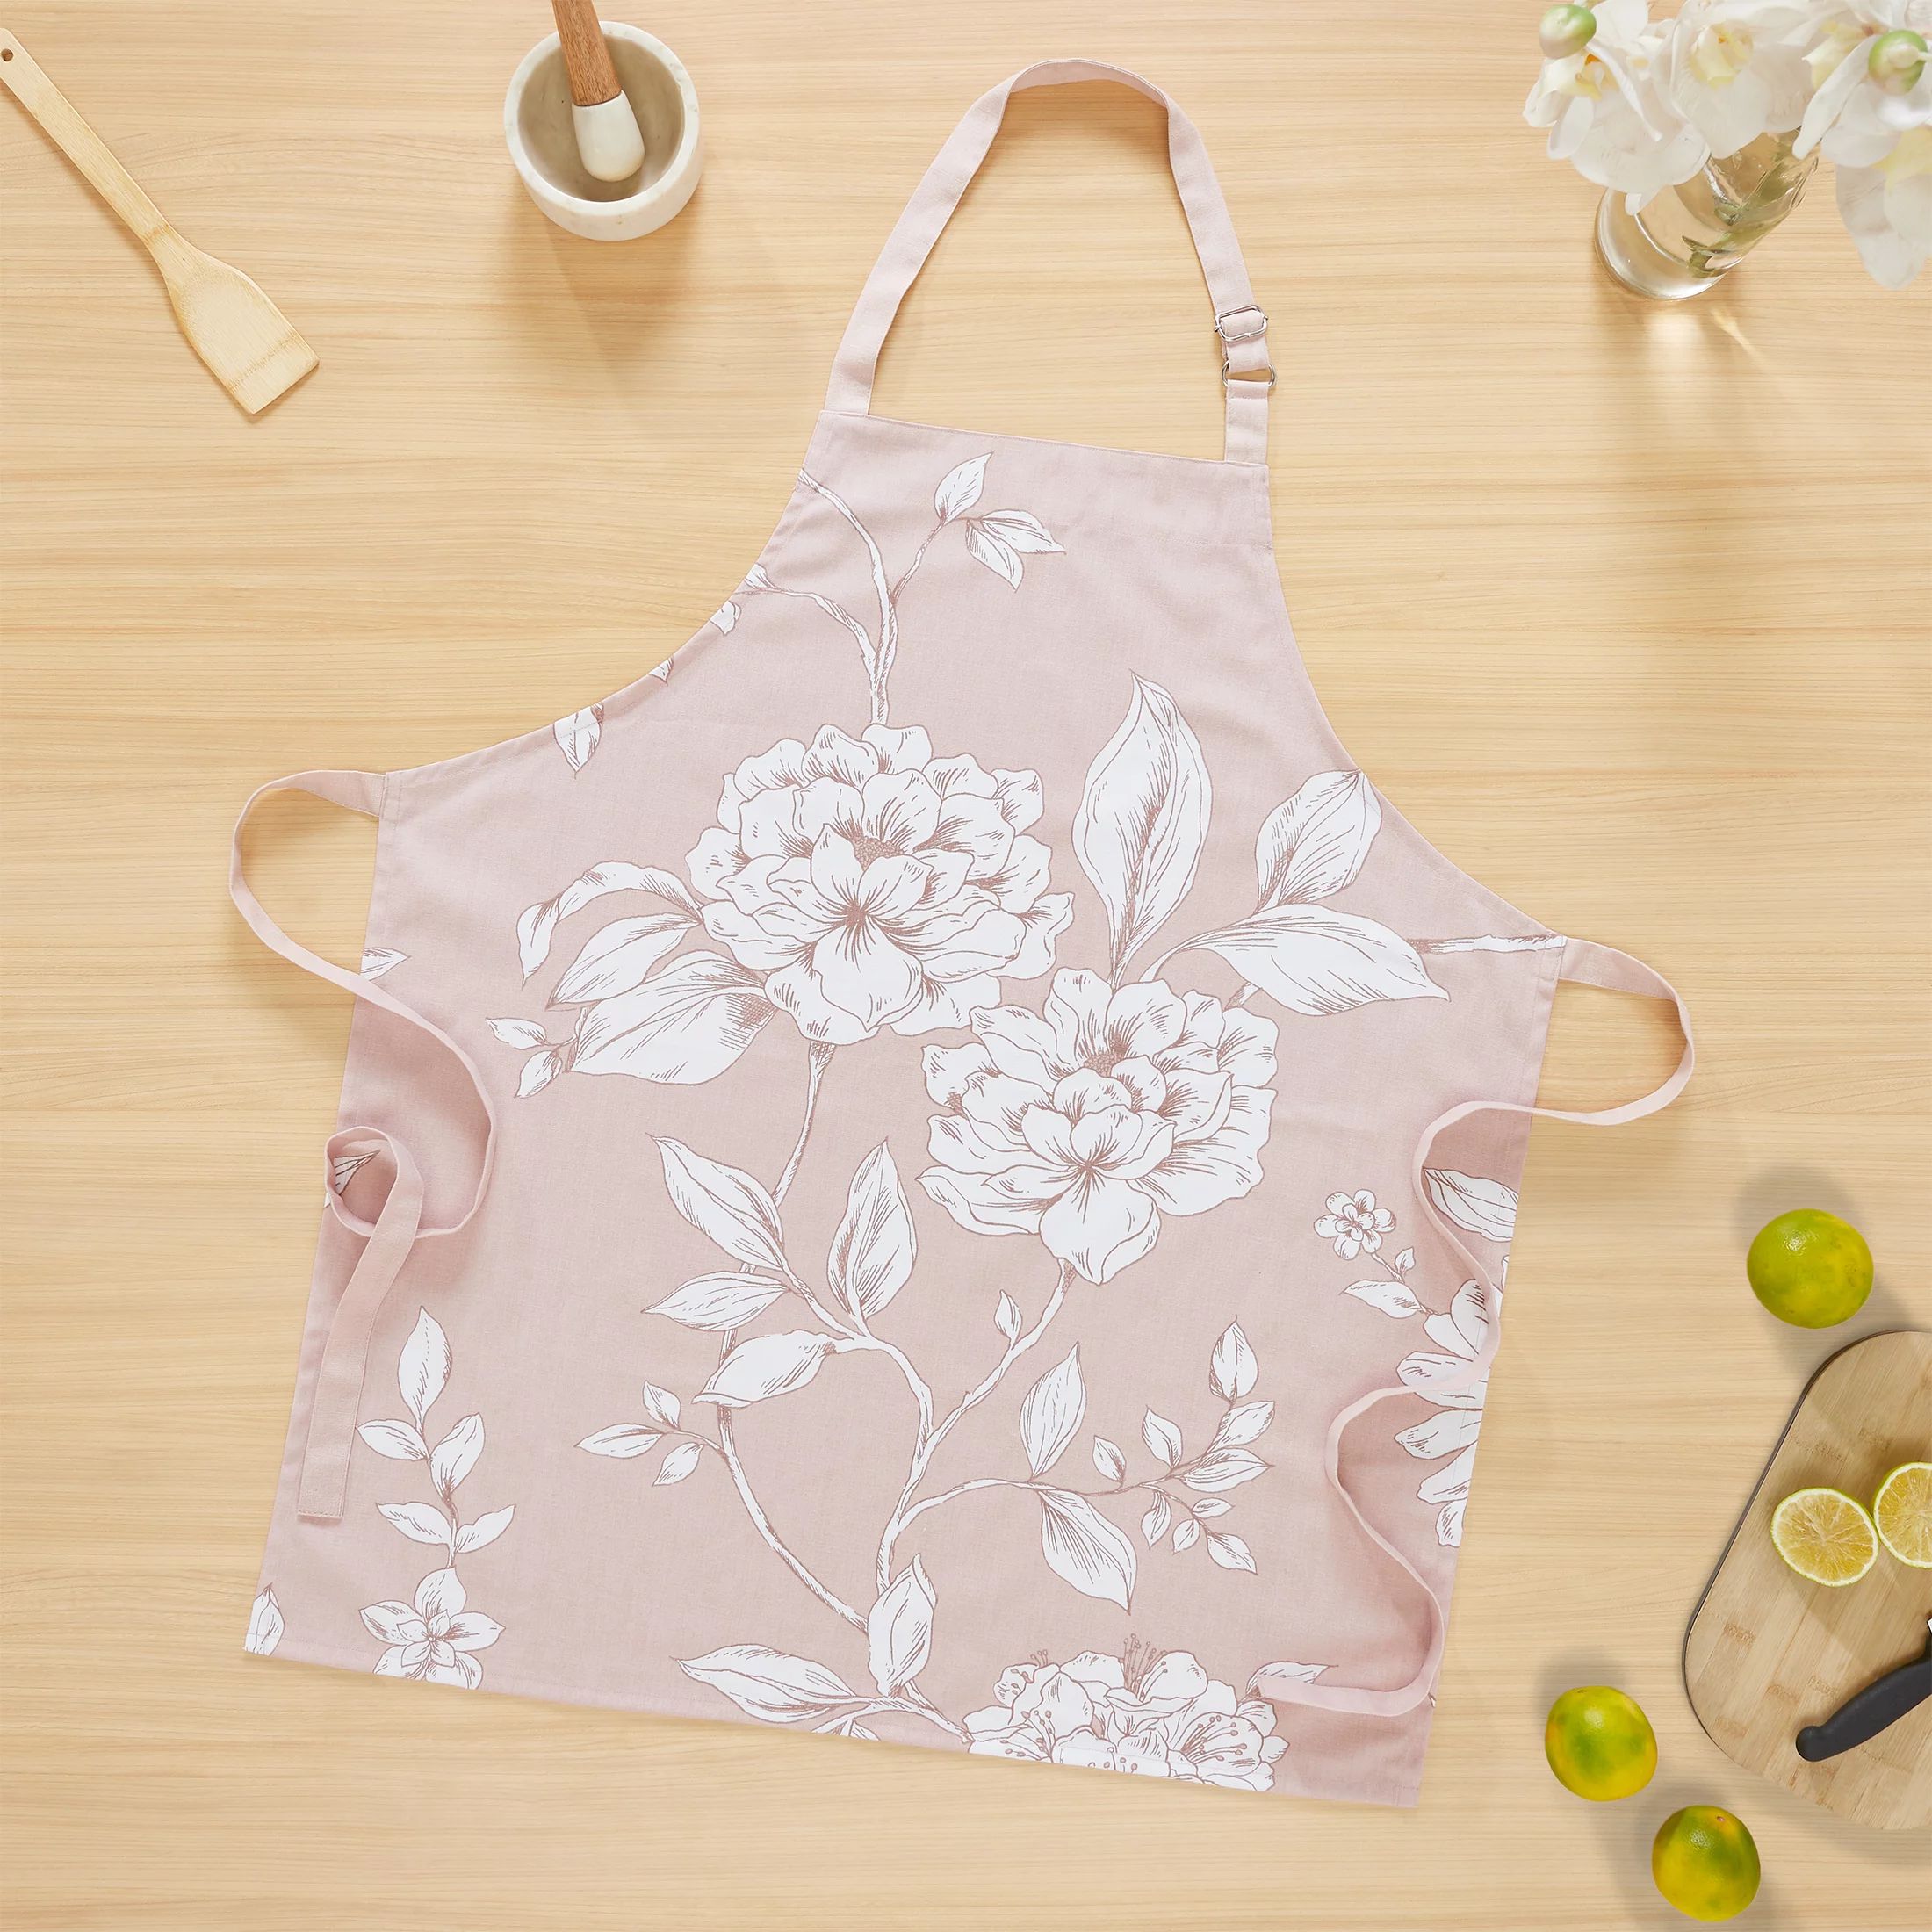 My Texas House Polyester/Cotton 30" x 54" Oversized Floral Printed Apron, Blush | Walmart (US)